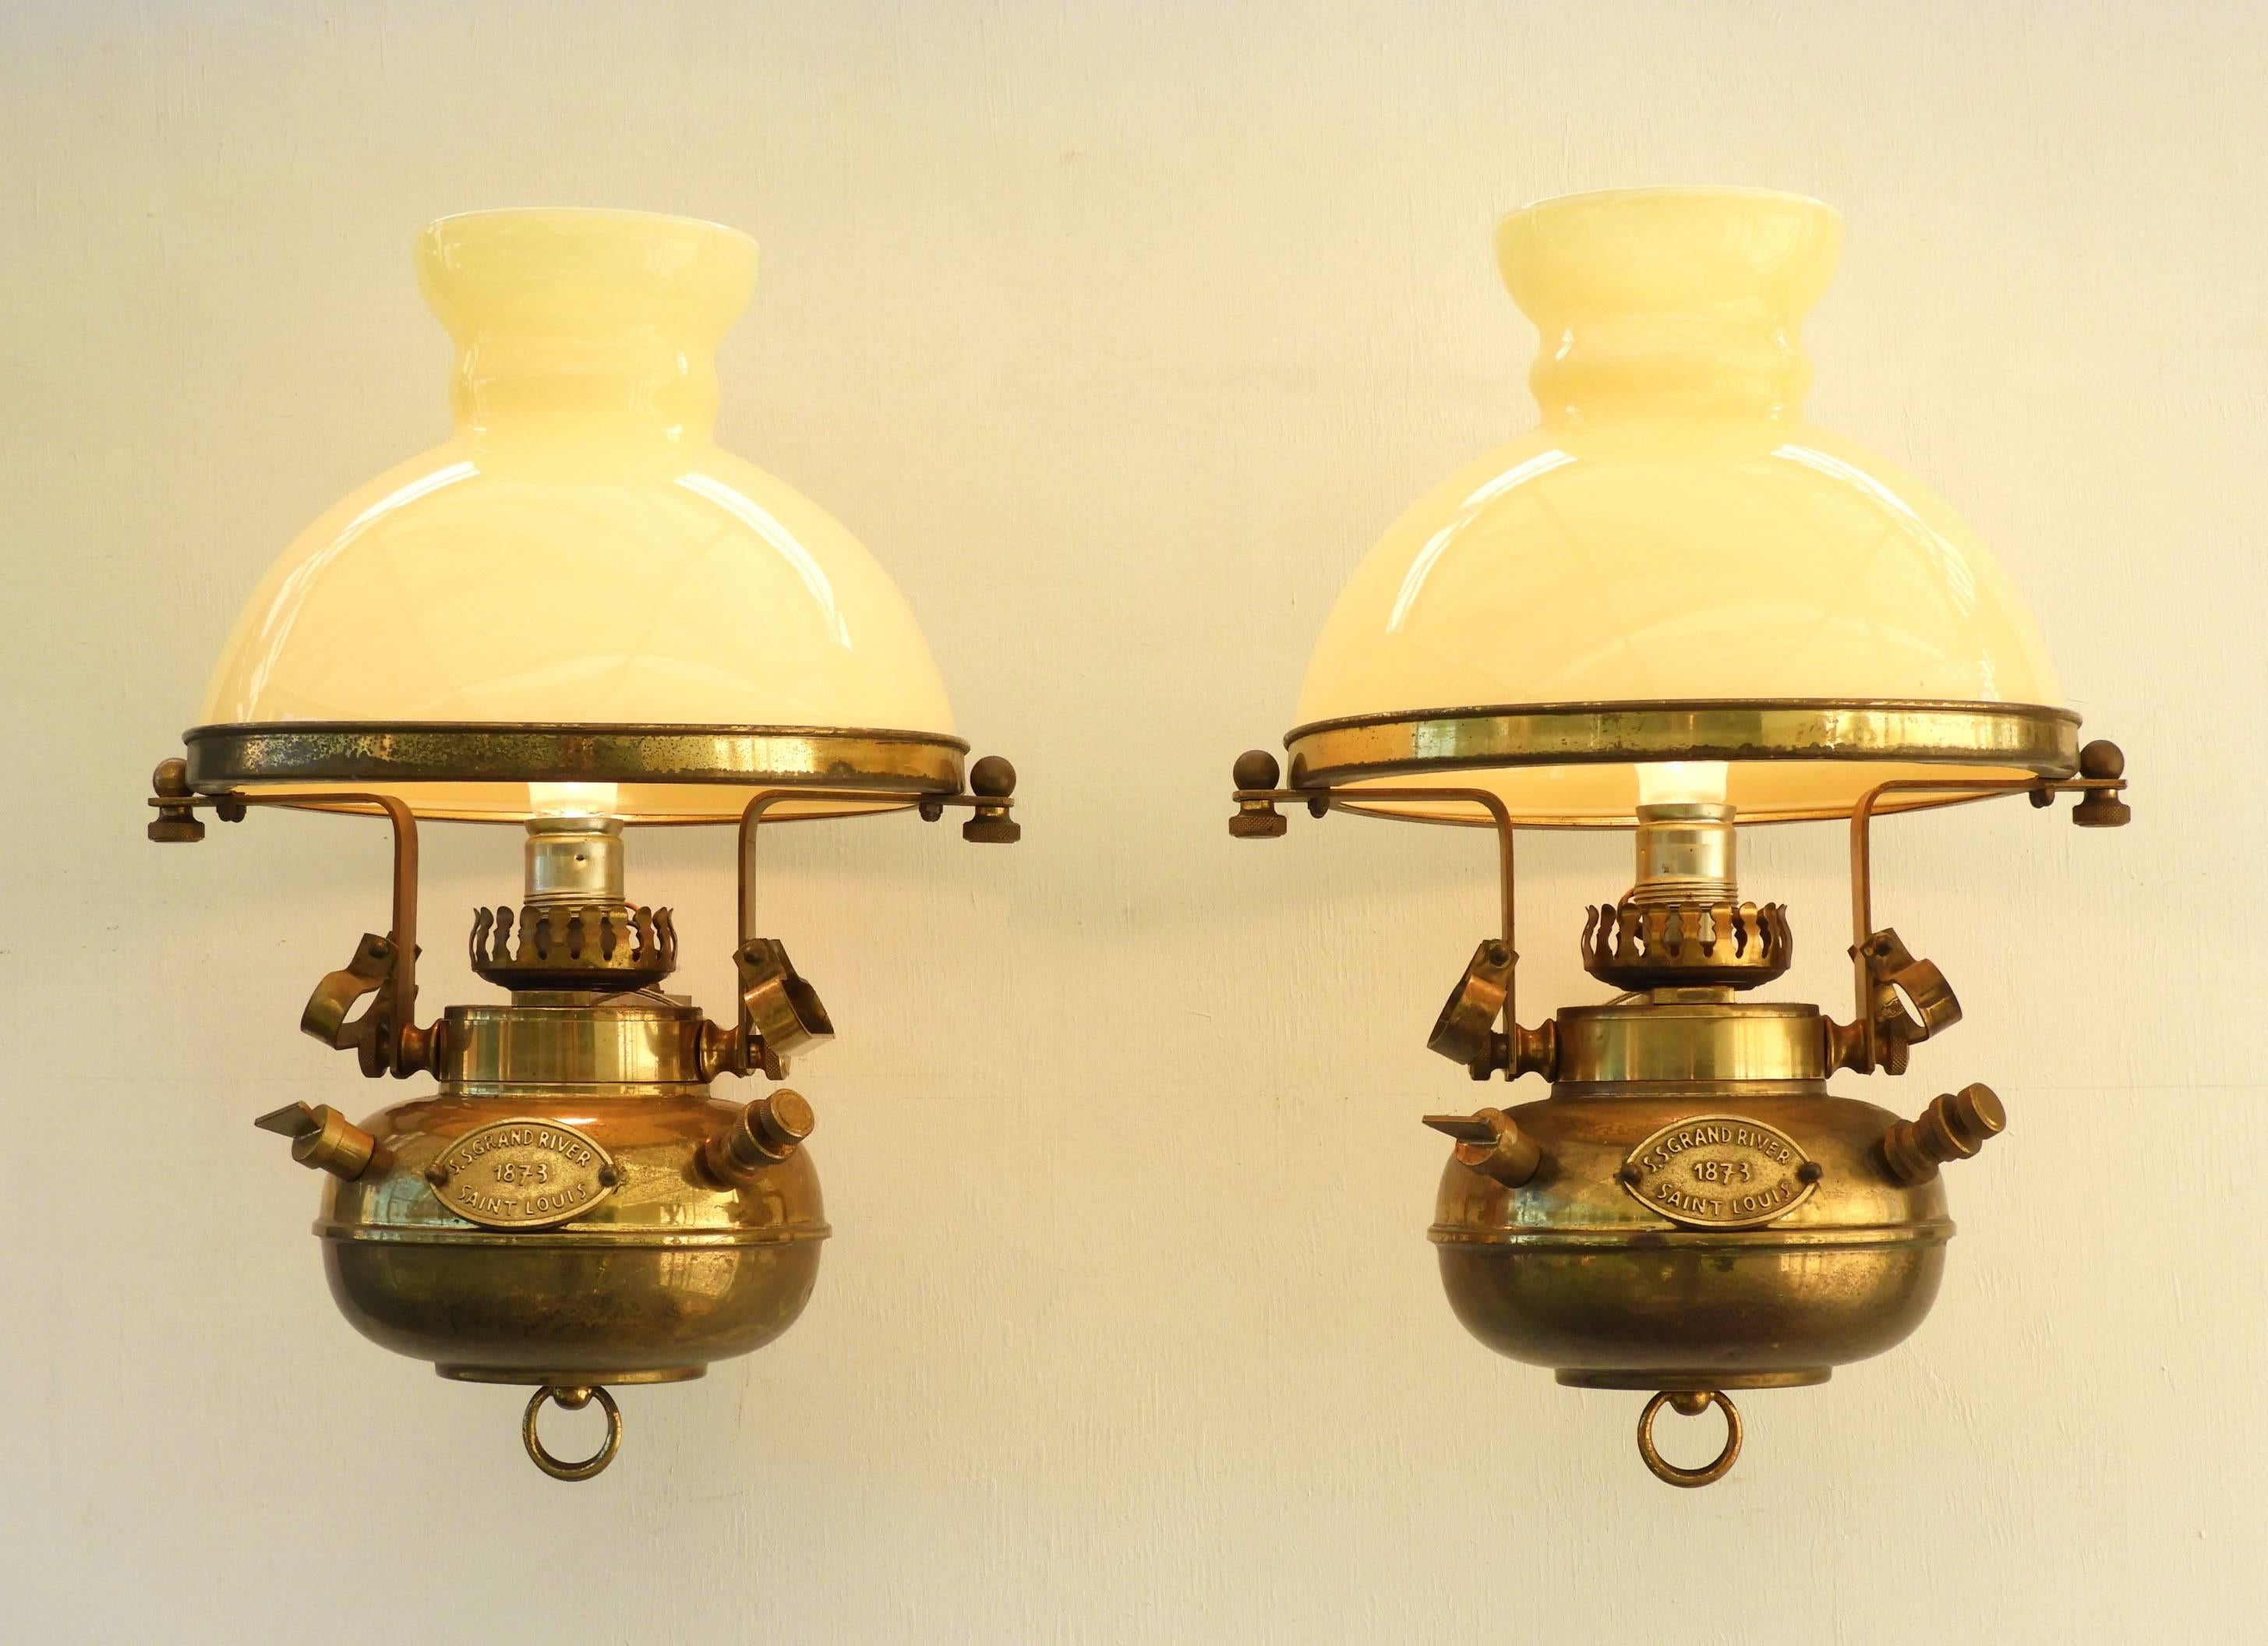 Brass Wall Lights Sconces 20th century Marine Nautical theme 2 available
No losses to glass
Ship interiors inspired Electrified Oil Lamps with tribute plaque SS Grand River Saint Louis 1873
Aged Brass
These will be re-wired and tested to USA or UK